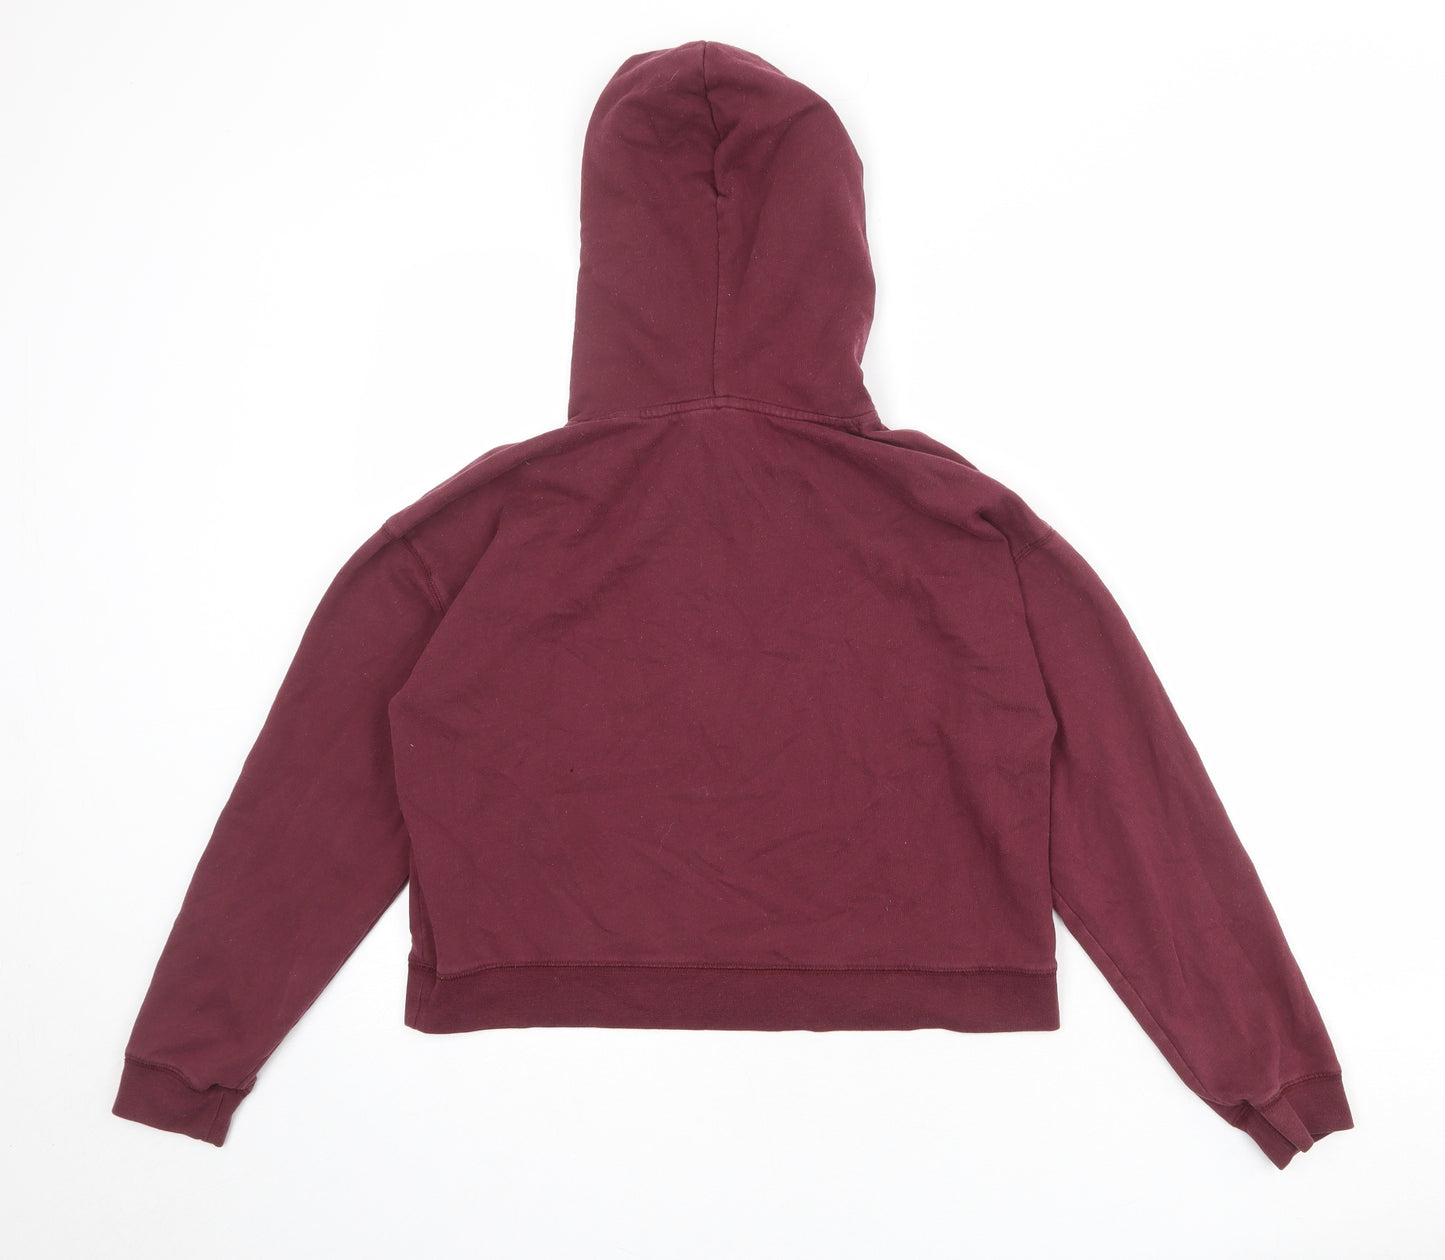 Jack Wills Womens Red Cotton Pullover Hoodie Size 10 Pullover